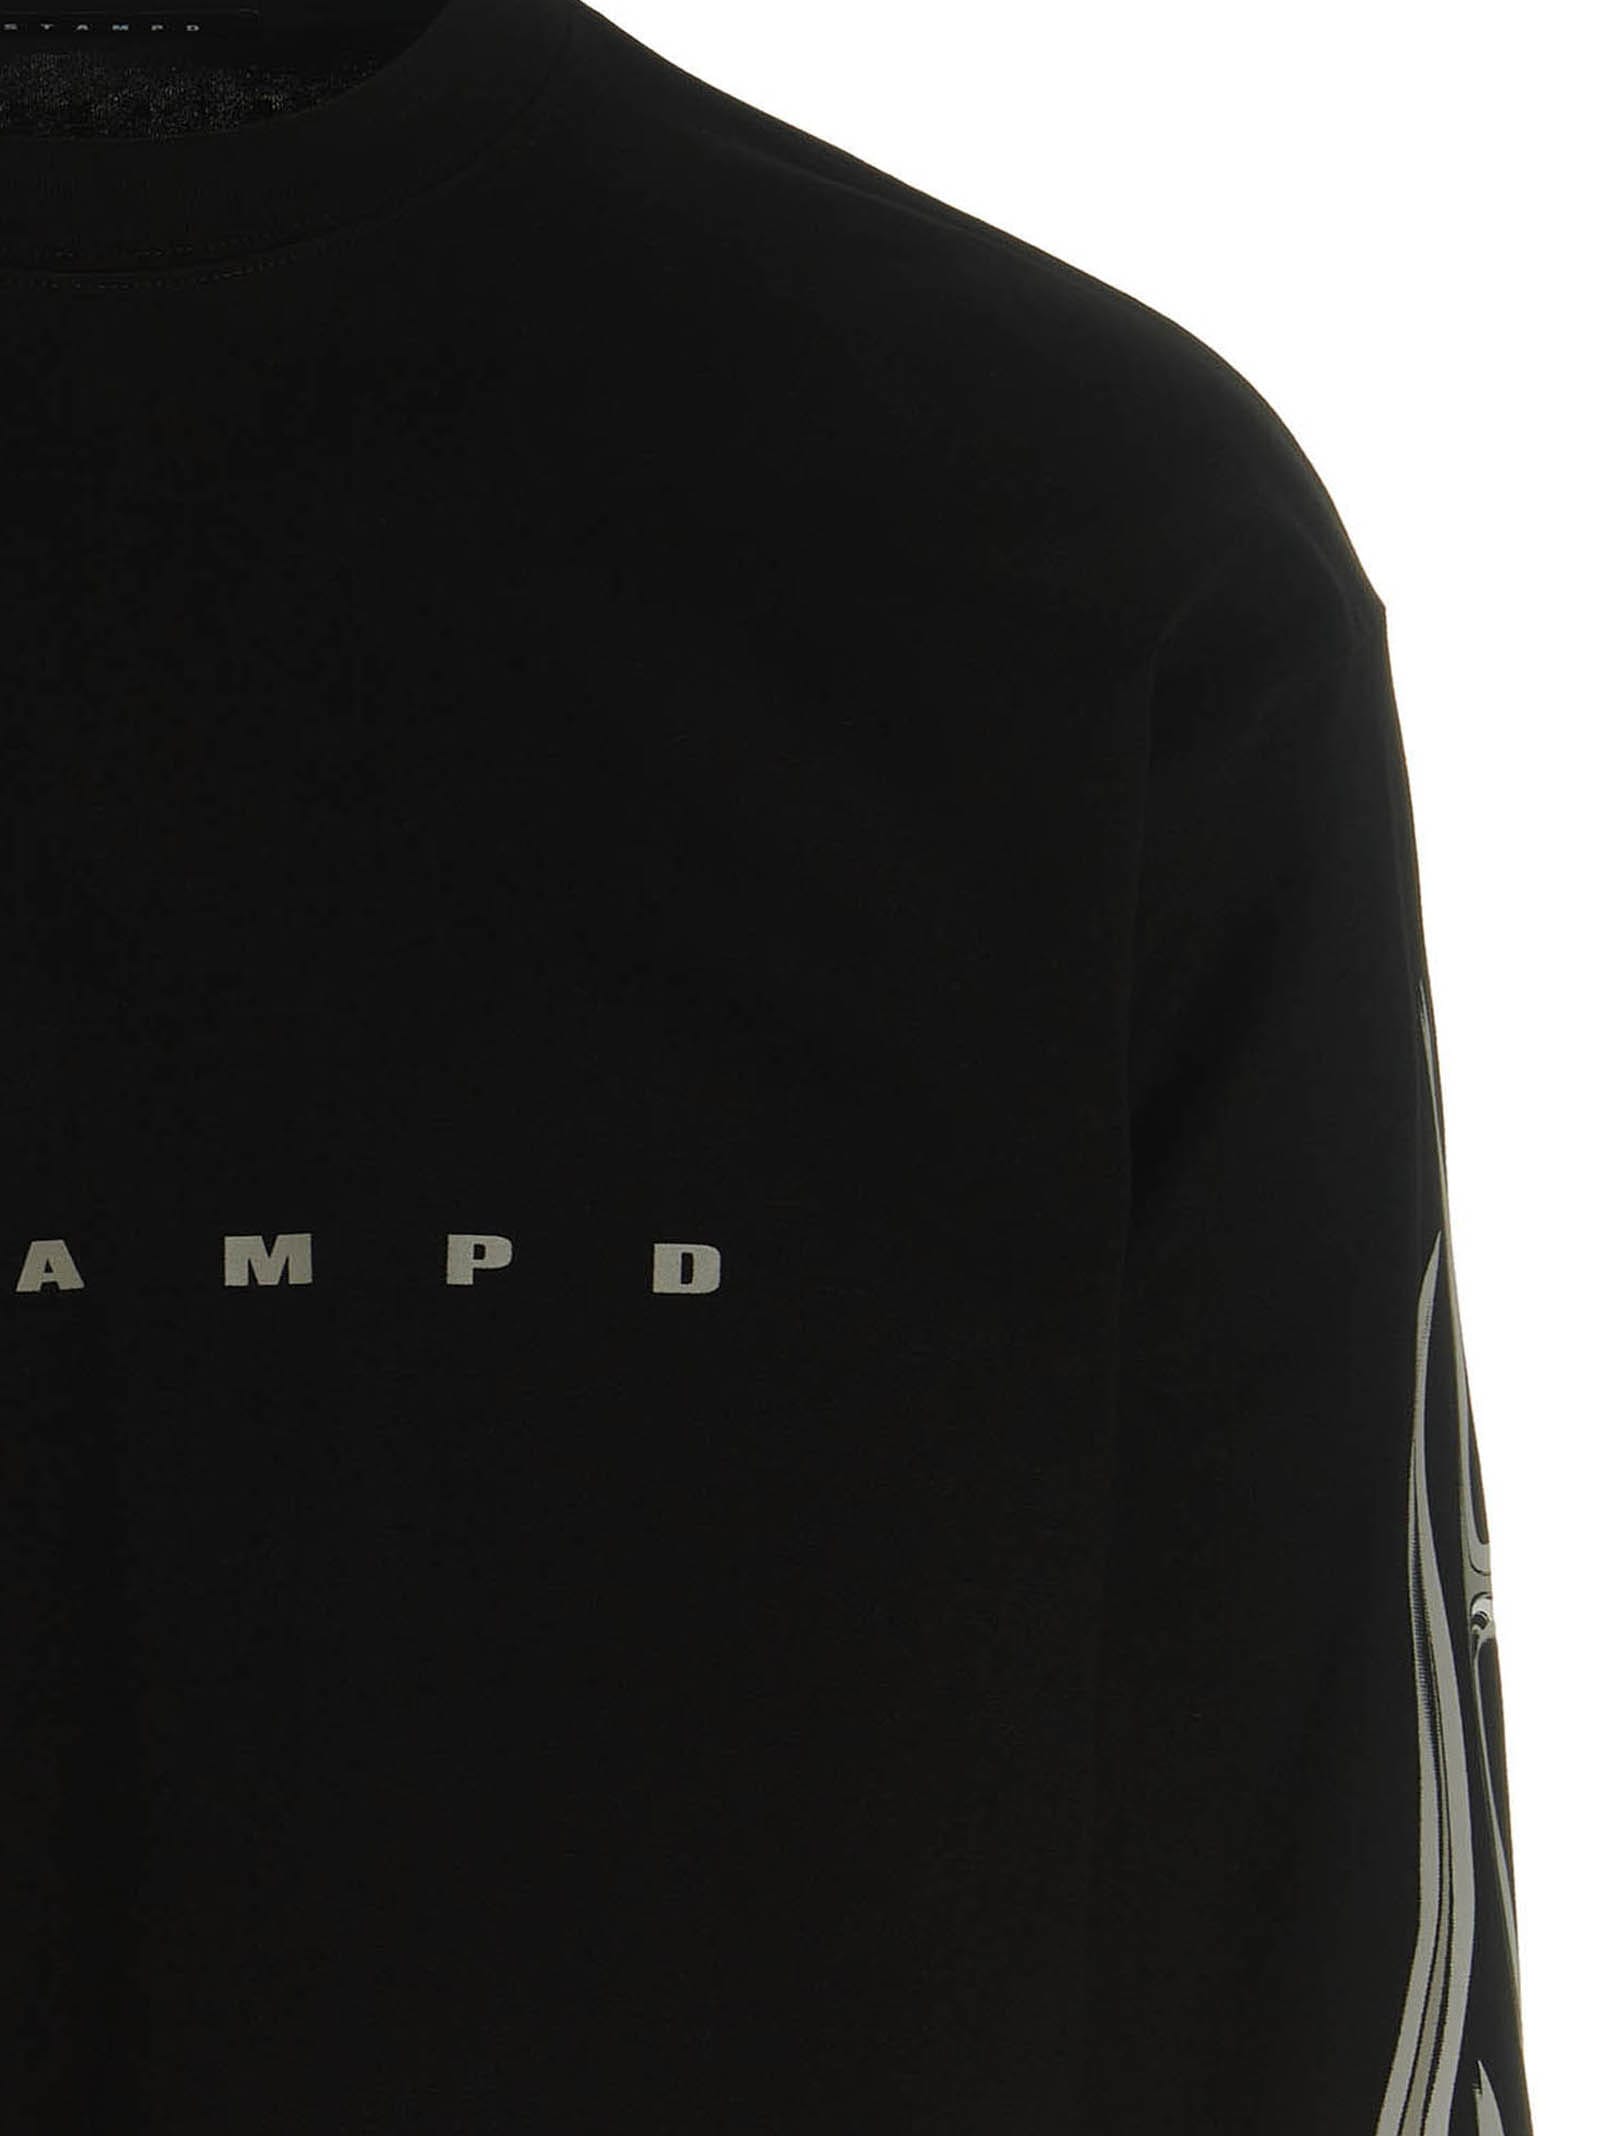 Shop Stampd T-shirt Chrome Flame In Black